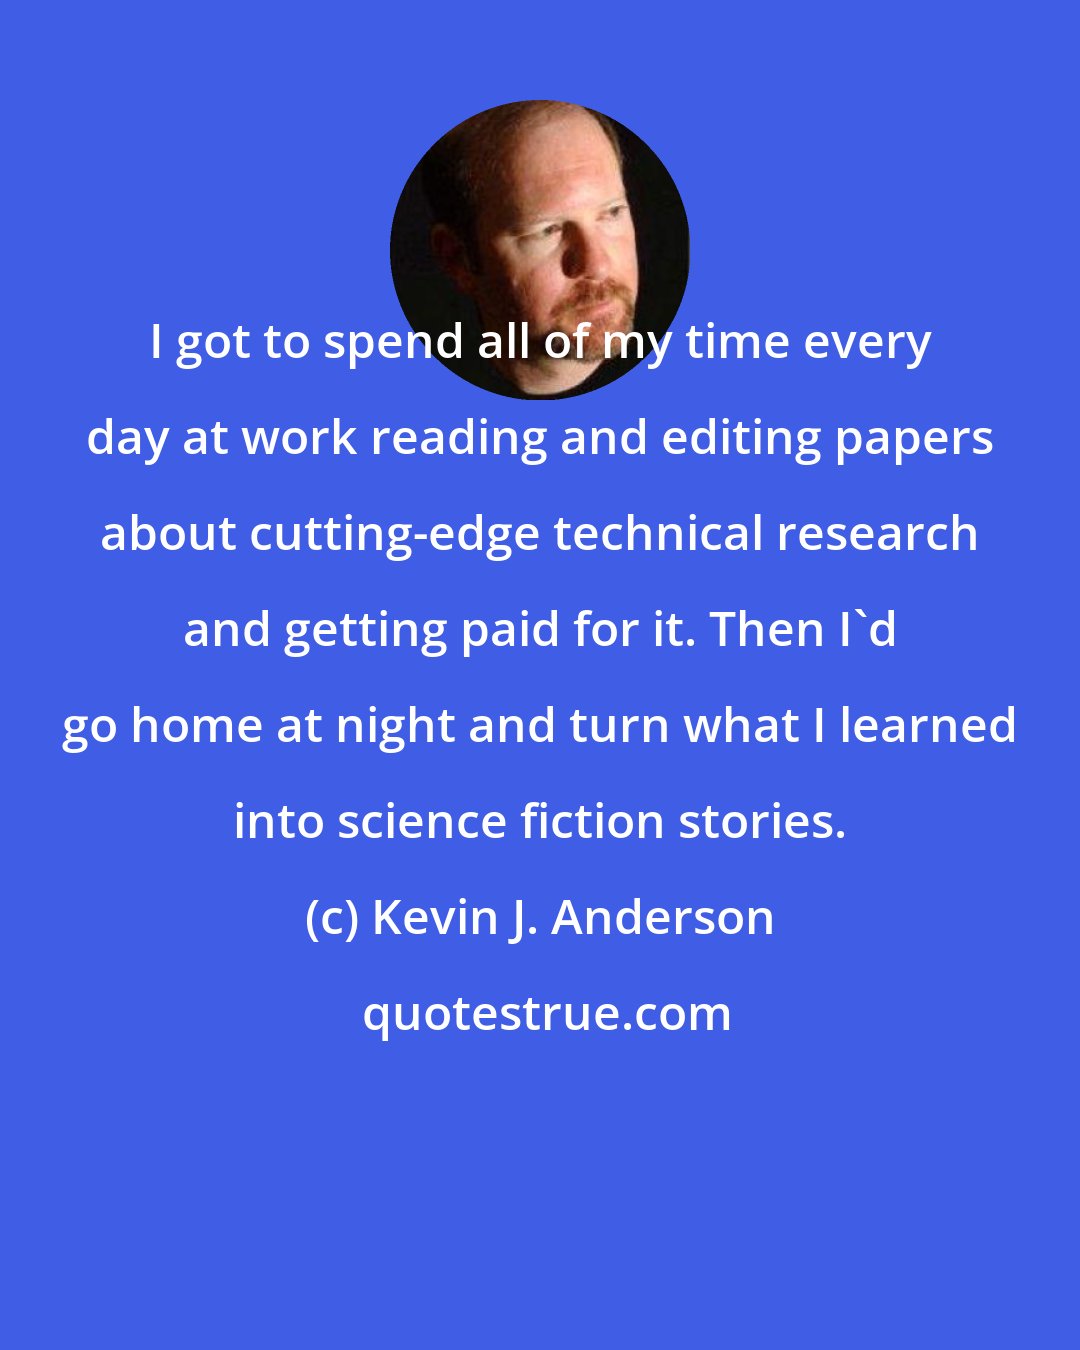 Kevin J. Anderson: I got to spend all of my time every day at work reading and editing papers about cutting-edge technical research and getting paid for it. Then I'd go home at night and turn what I learned into science fiction stories.